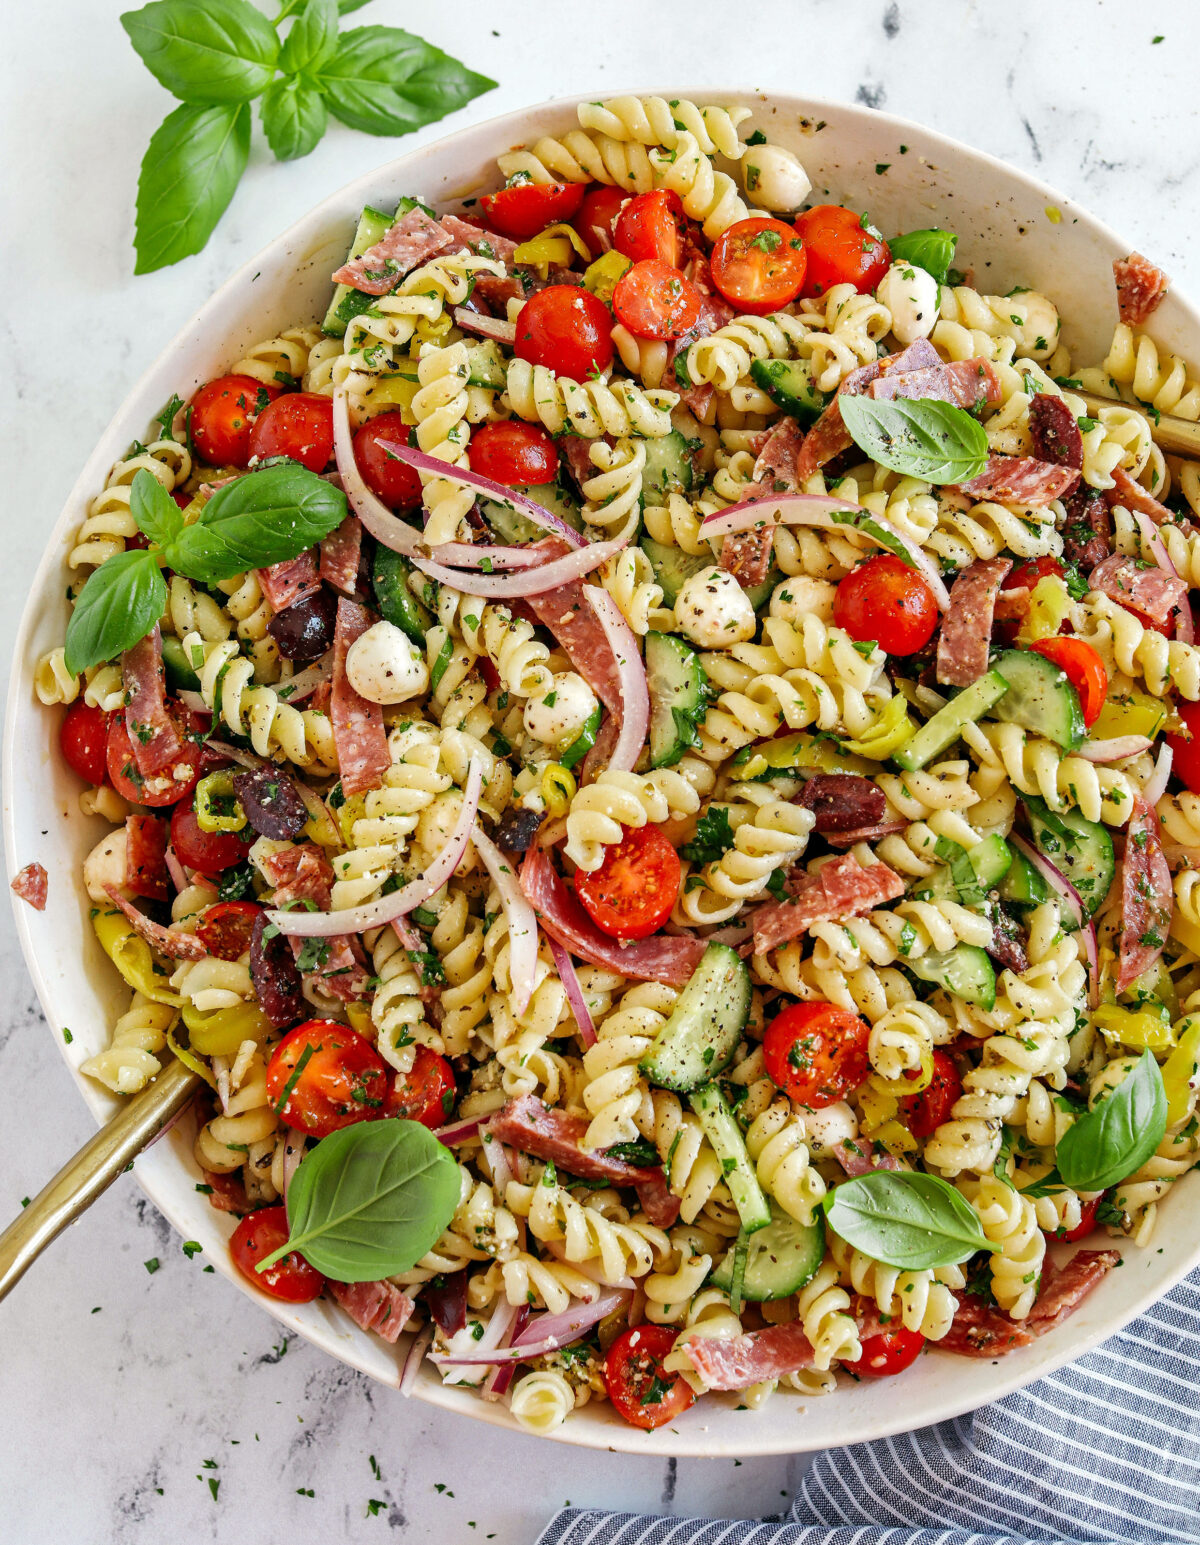 This EASY Italian Pasta Salad is loaded with juicy tomatoes, cucumbers, fresh mozzarella, spicy salami, pepperoncini, red onion and olives all tossed together with a zesty homemade Italian dressing!